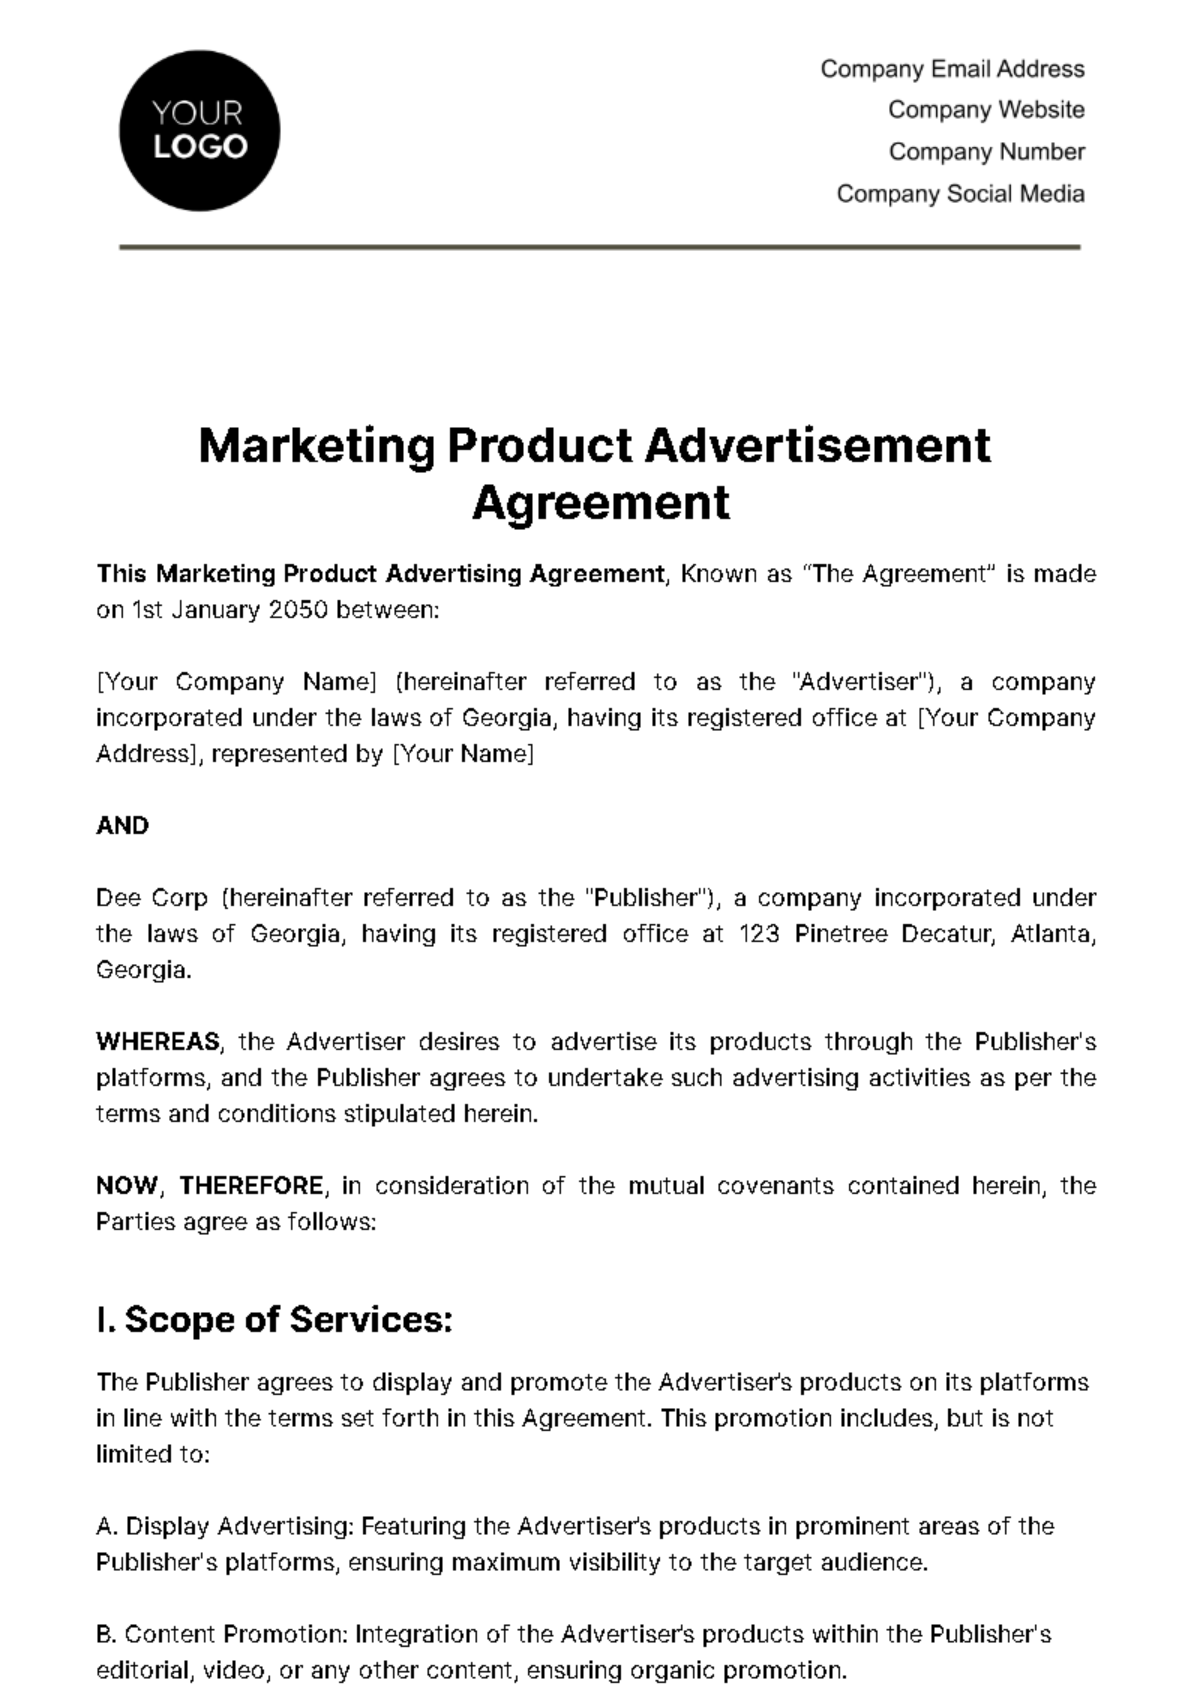 Marketing Product Advertisement Agreement Template